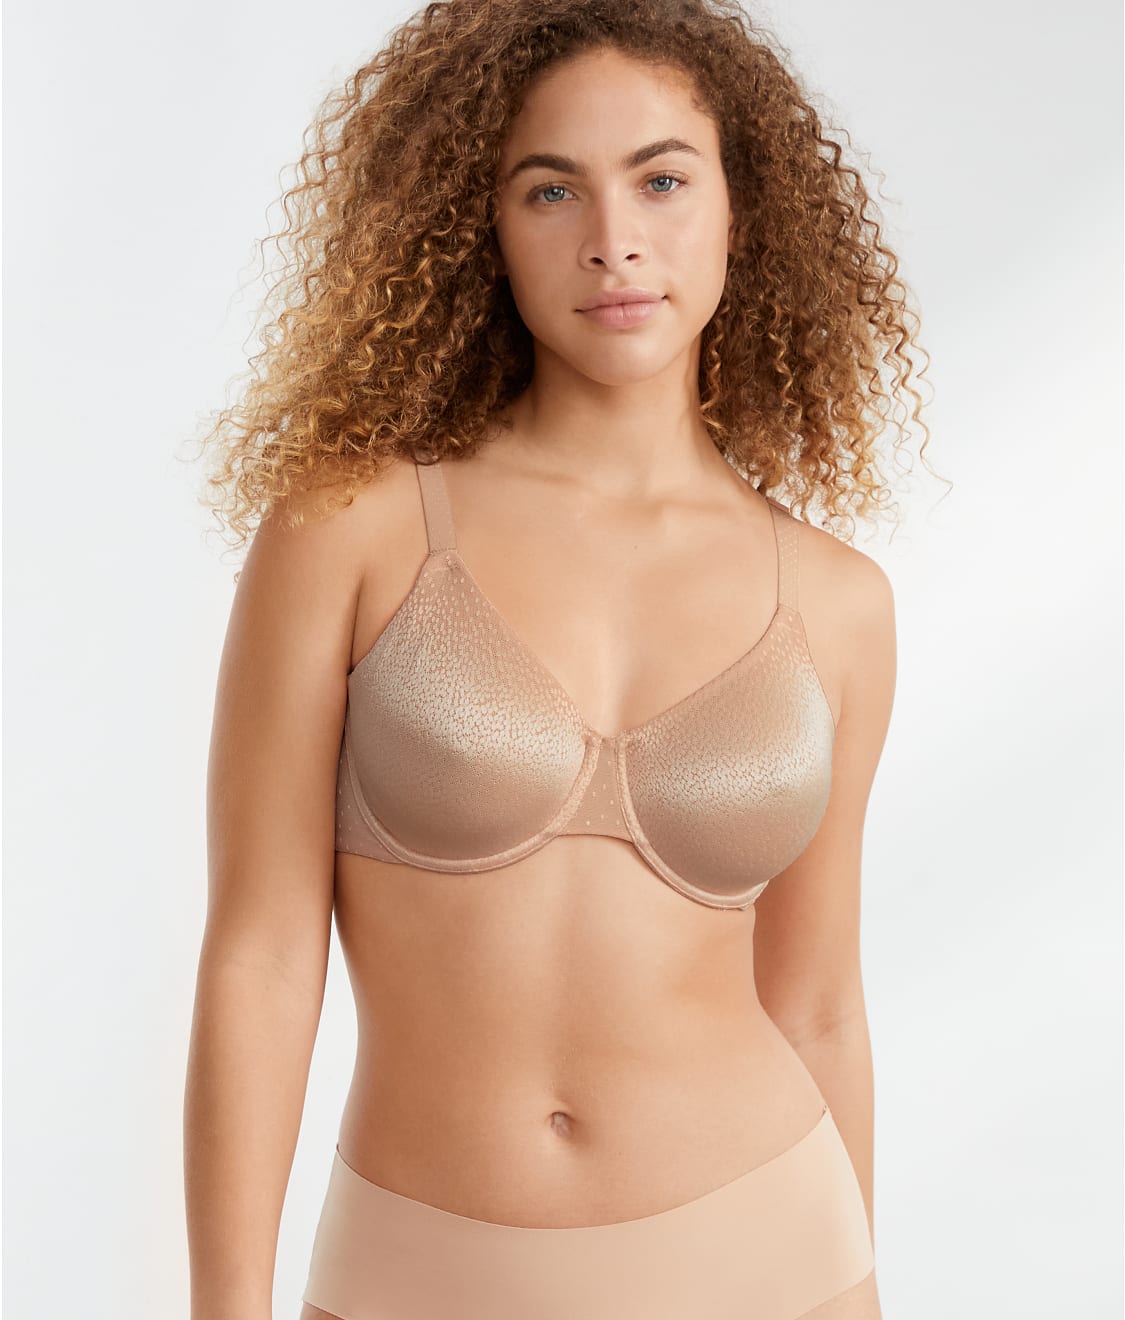 Shop Back and Side Smoothing Bra: Back Appeal™ Underwire Bra